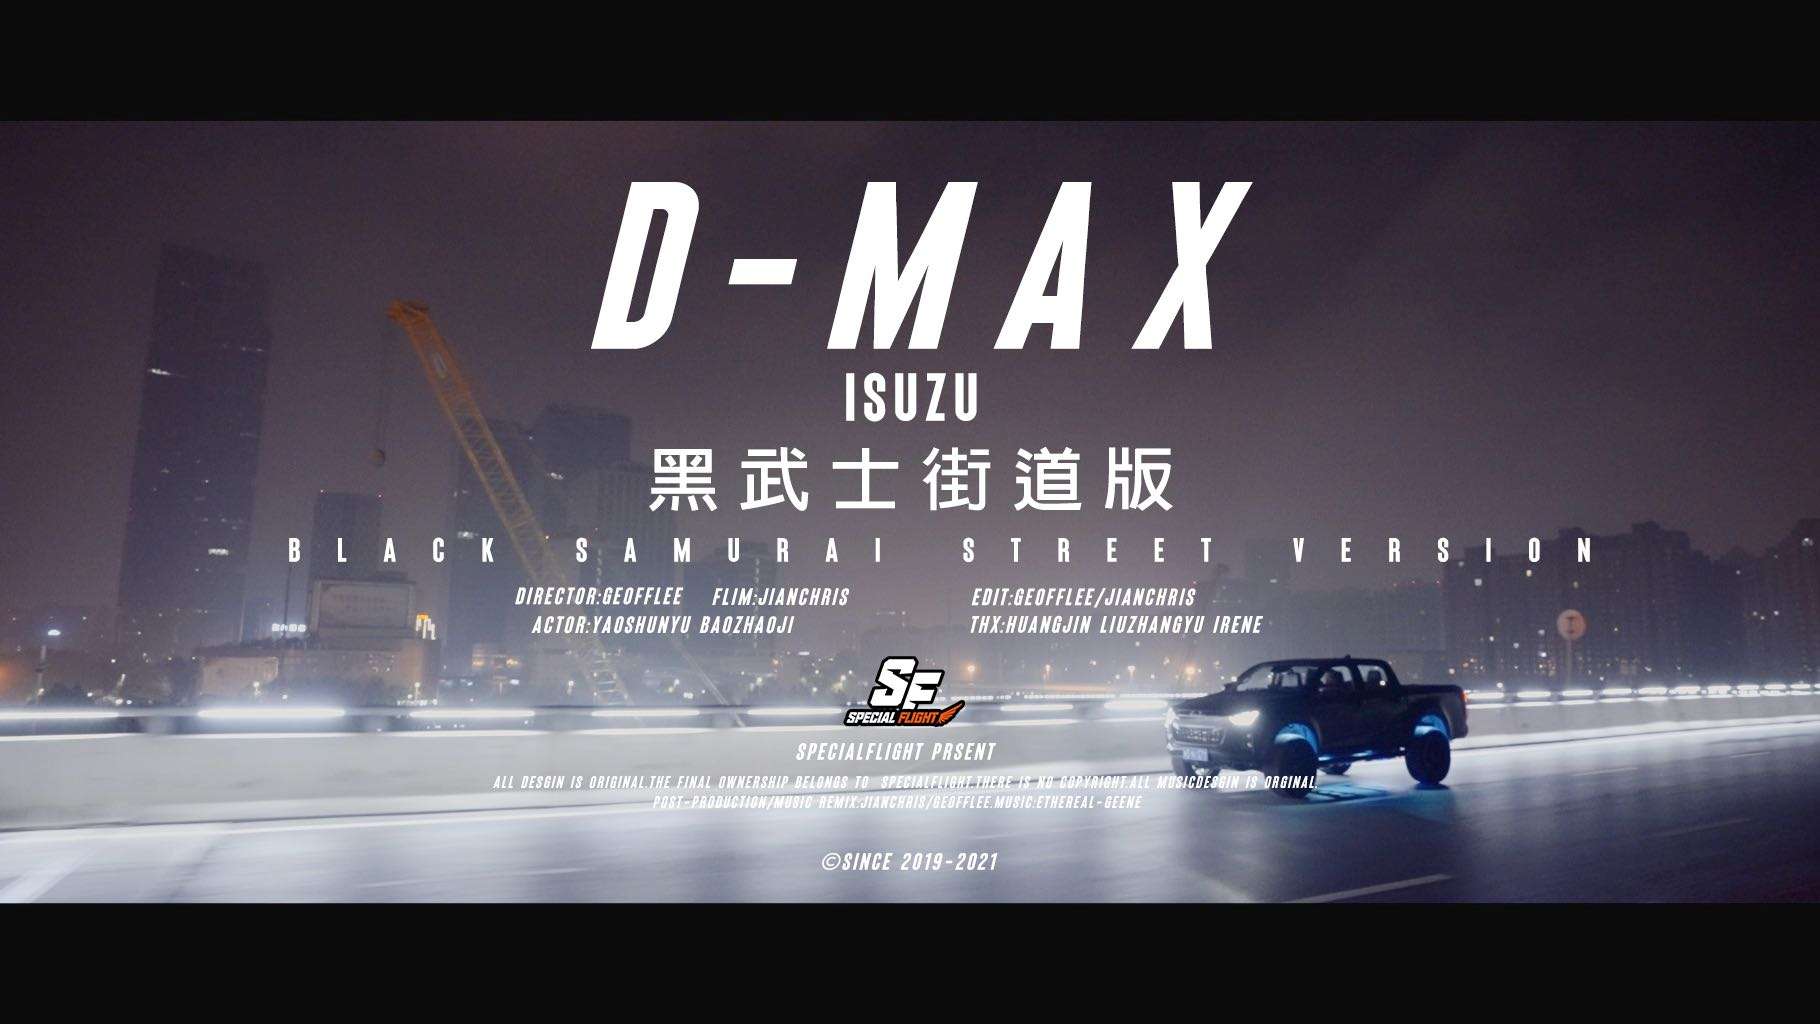 D-MAX ALL NEW IN THE ZZ CITY 黑武士街道版